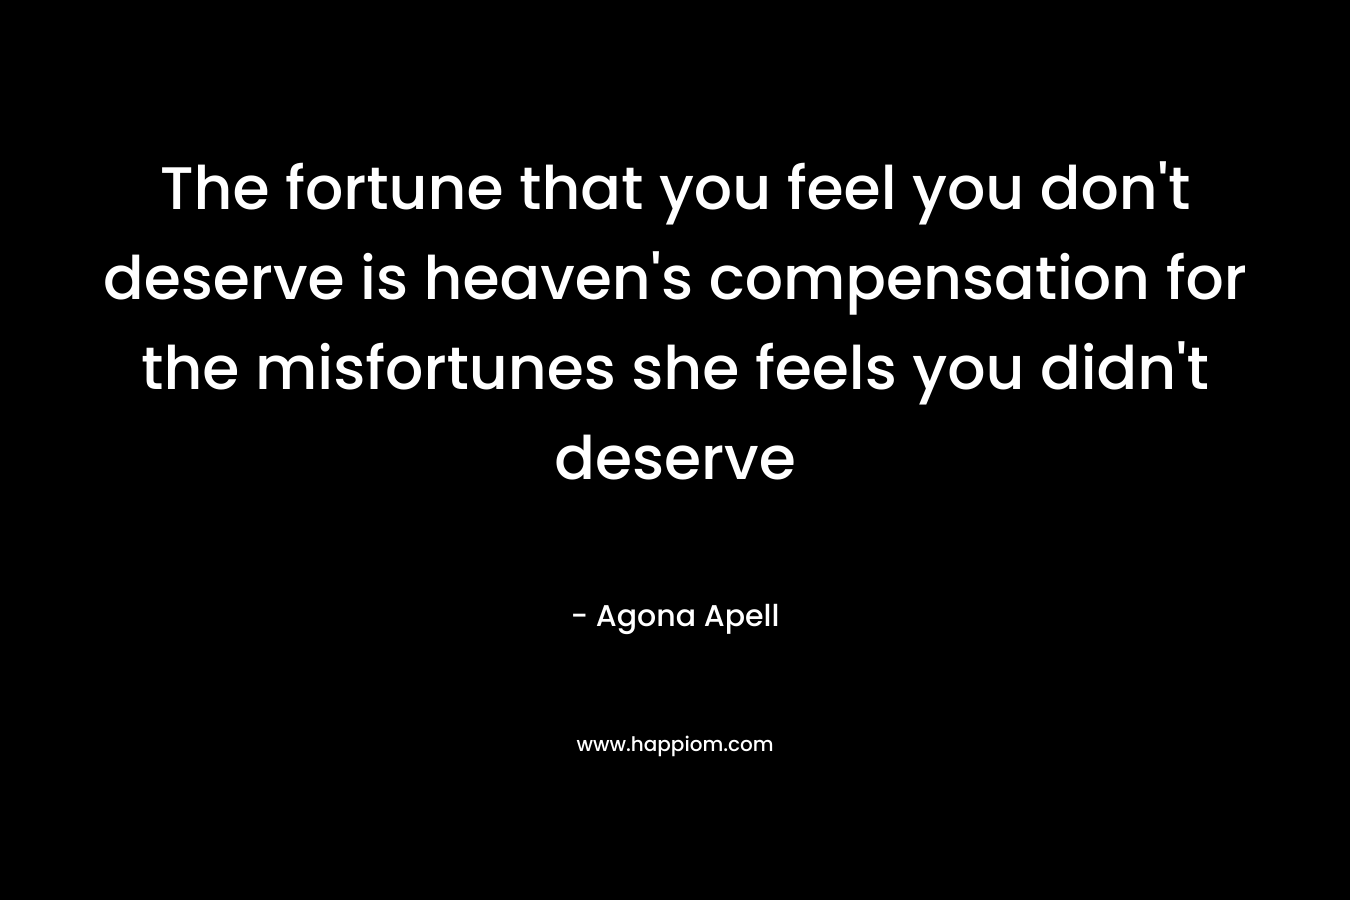 The fortune that you feel you don't deserve is heaven's compensation for the misfortunes she feels you didn't deserve